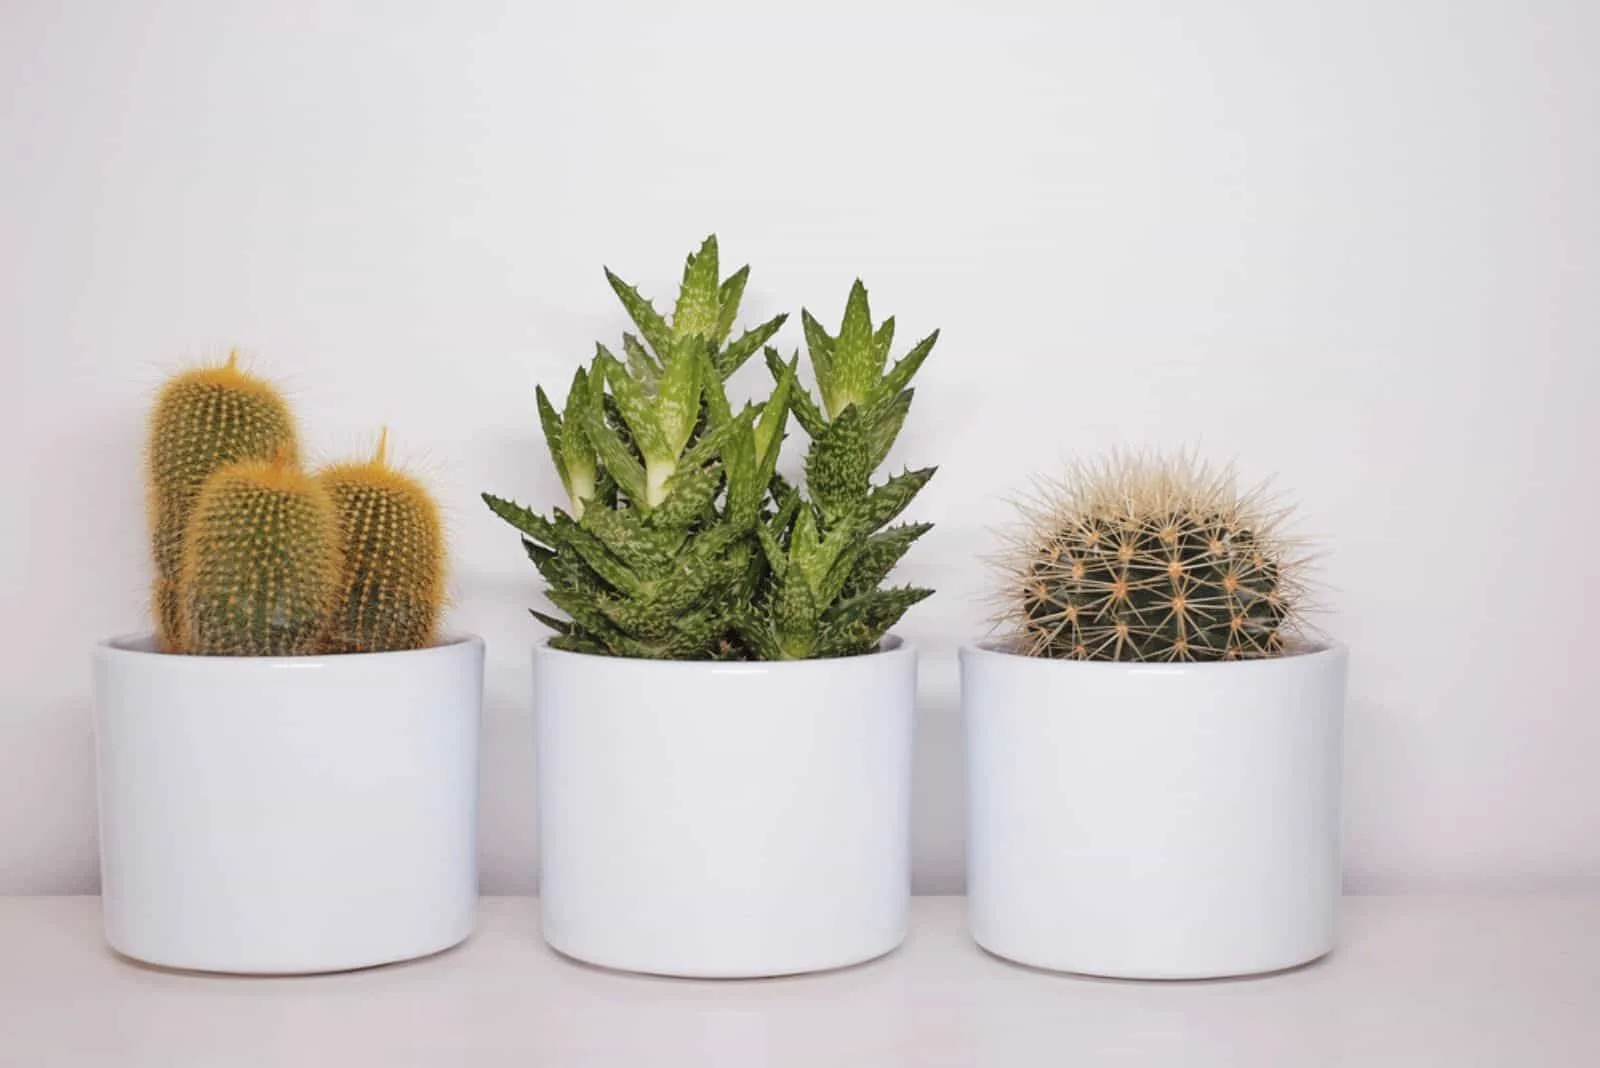 Three succulents and cacti in plain white plant pots